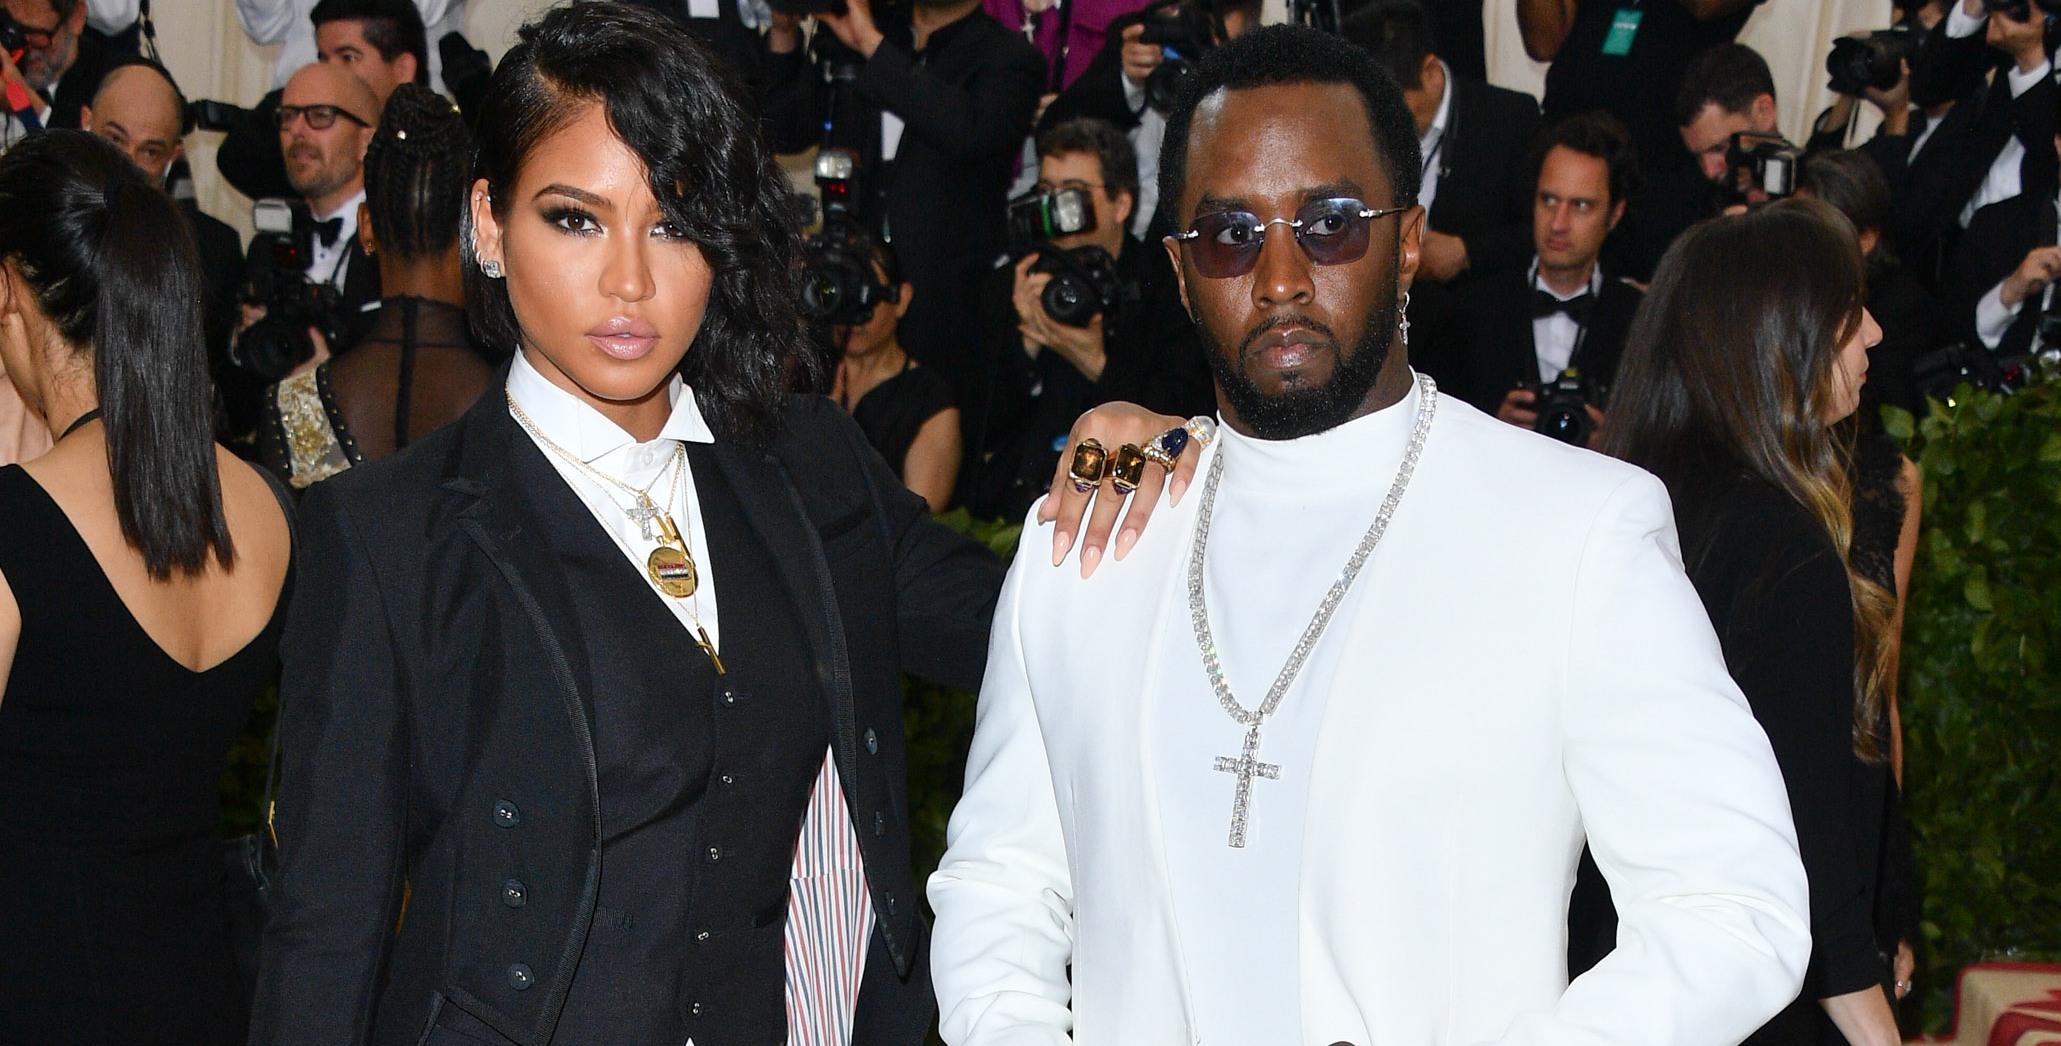 Cassie Ventura and Sean Combs attend the Heavenly Bodies: Fashion & The Catholic Imagination Costume Institute Gala on May 7, 2018